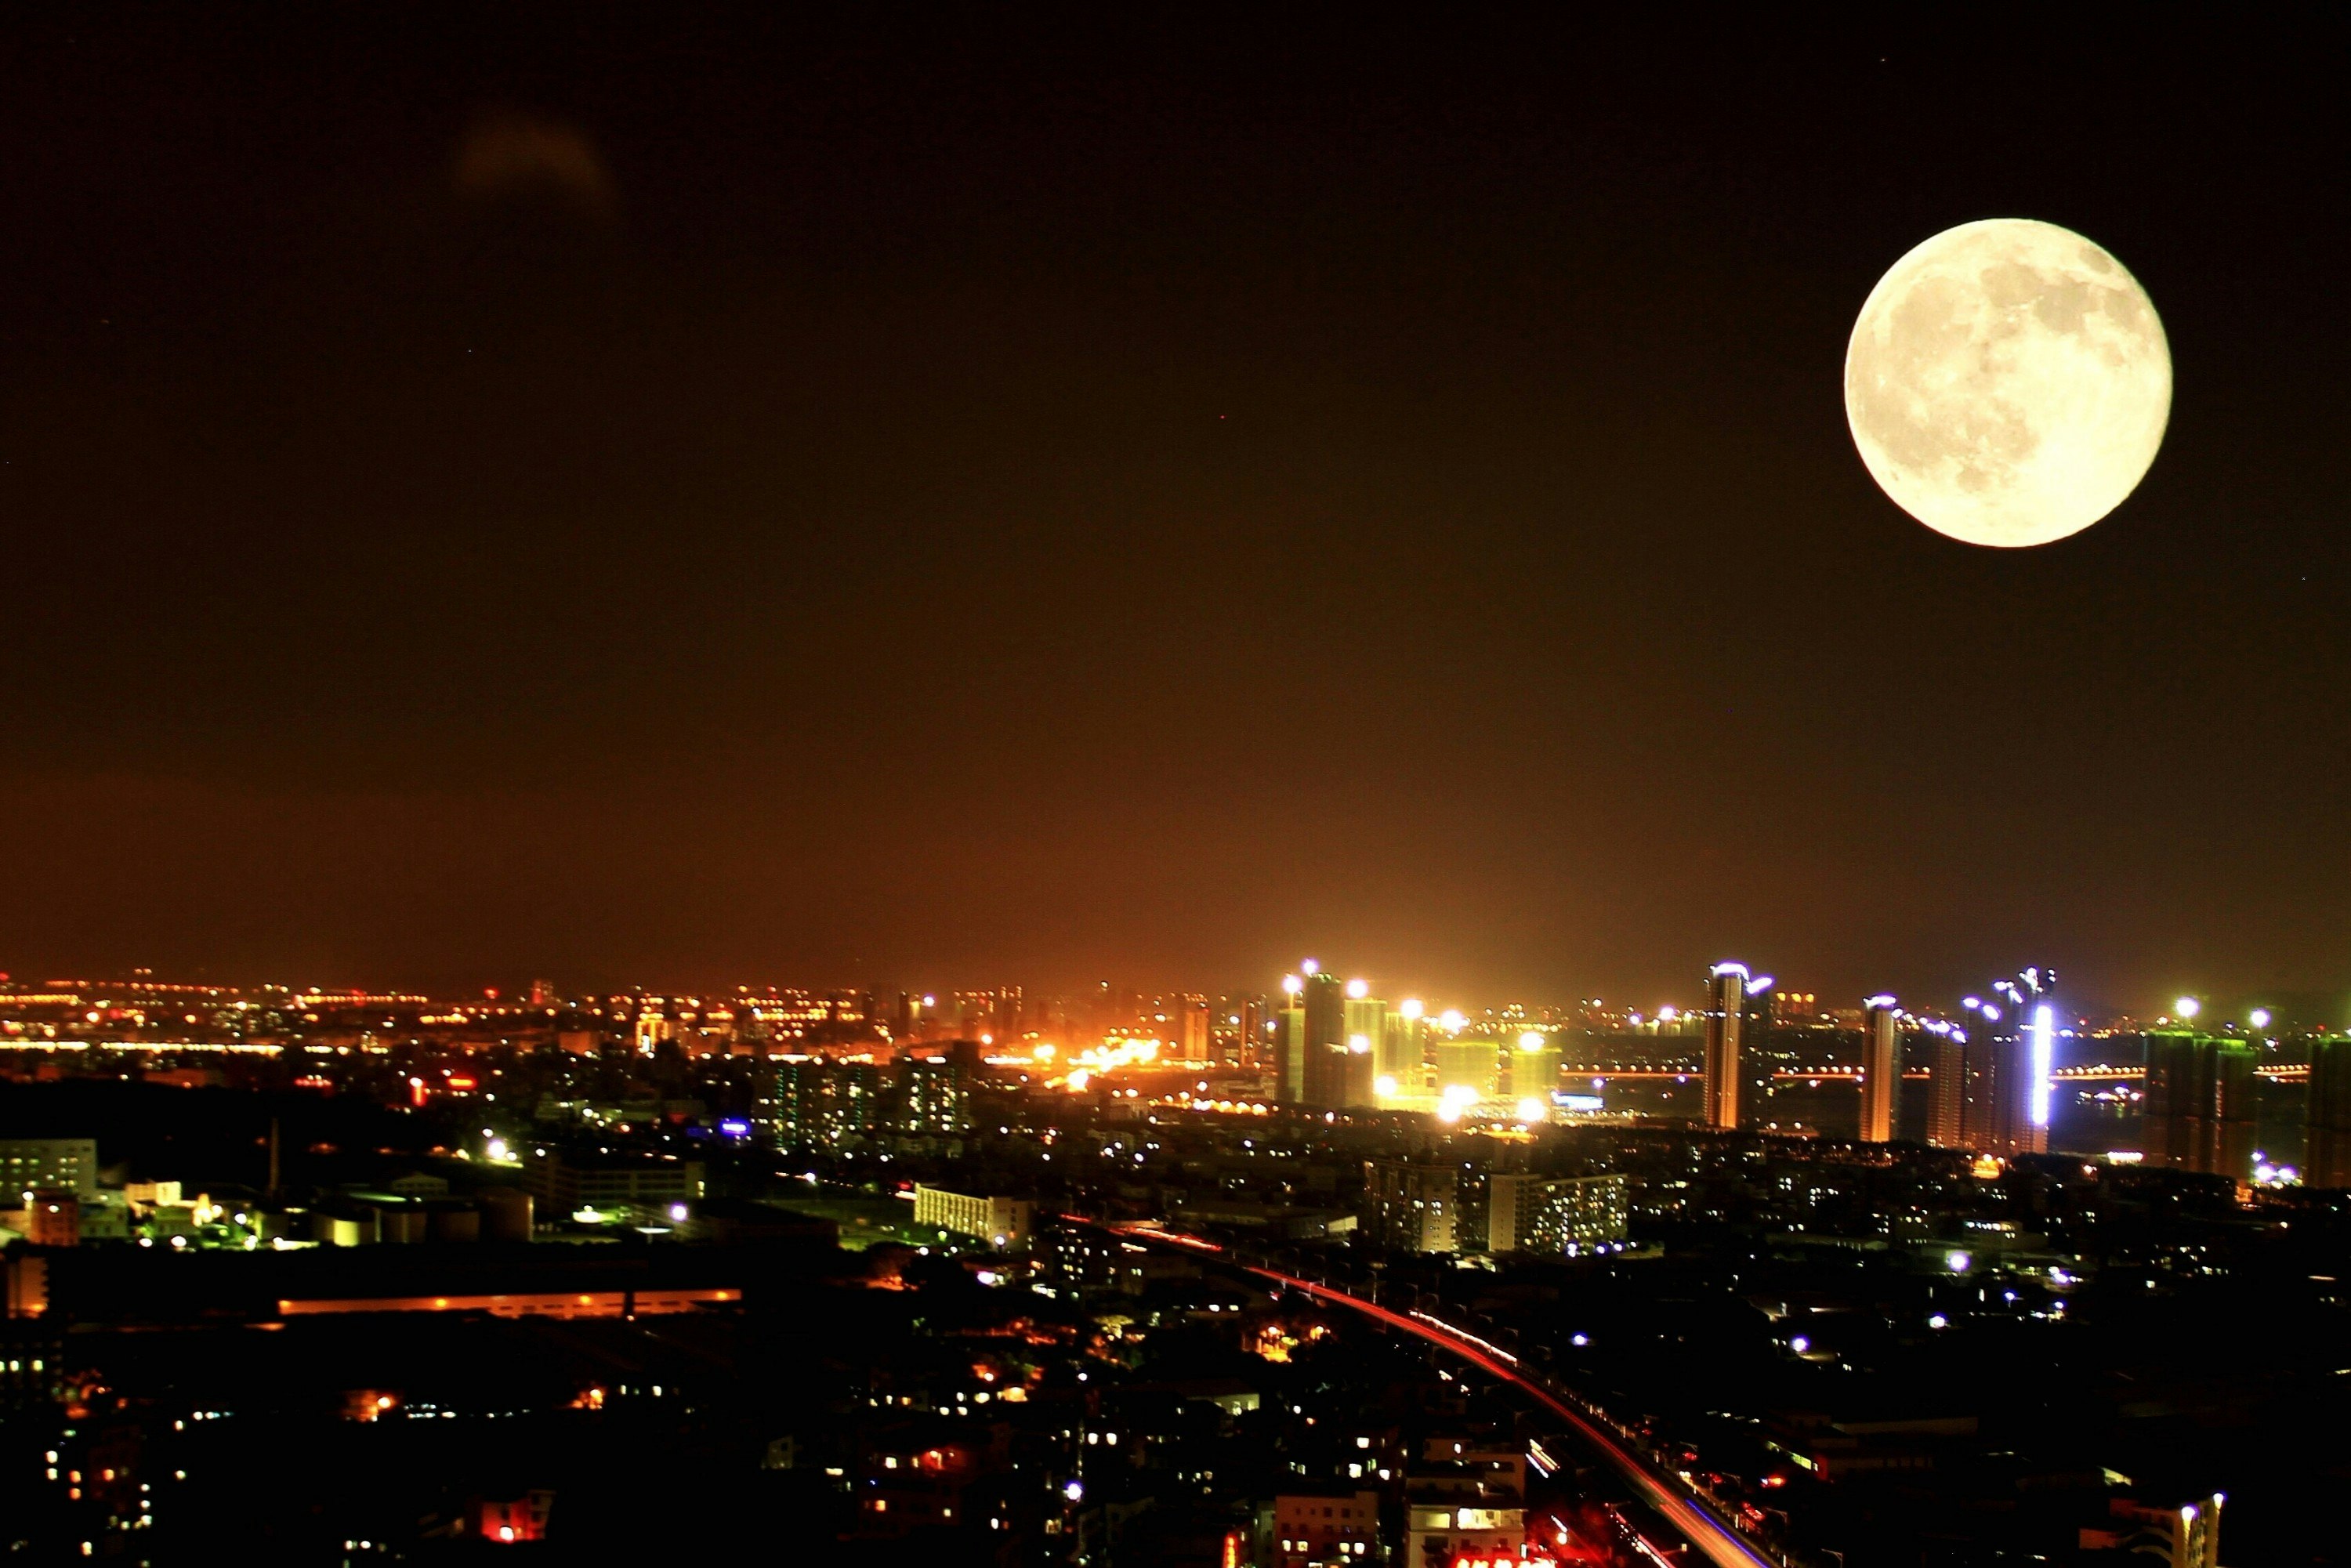 A supermoon over a city at night.